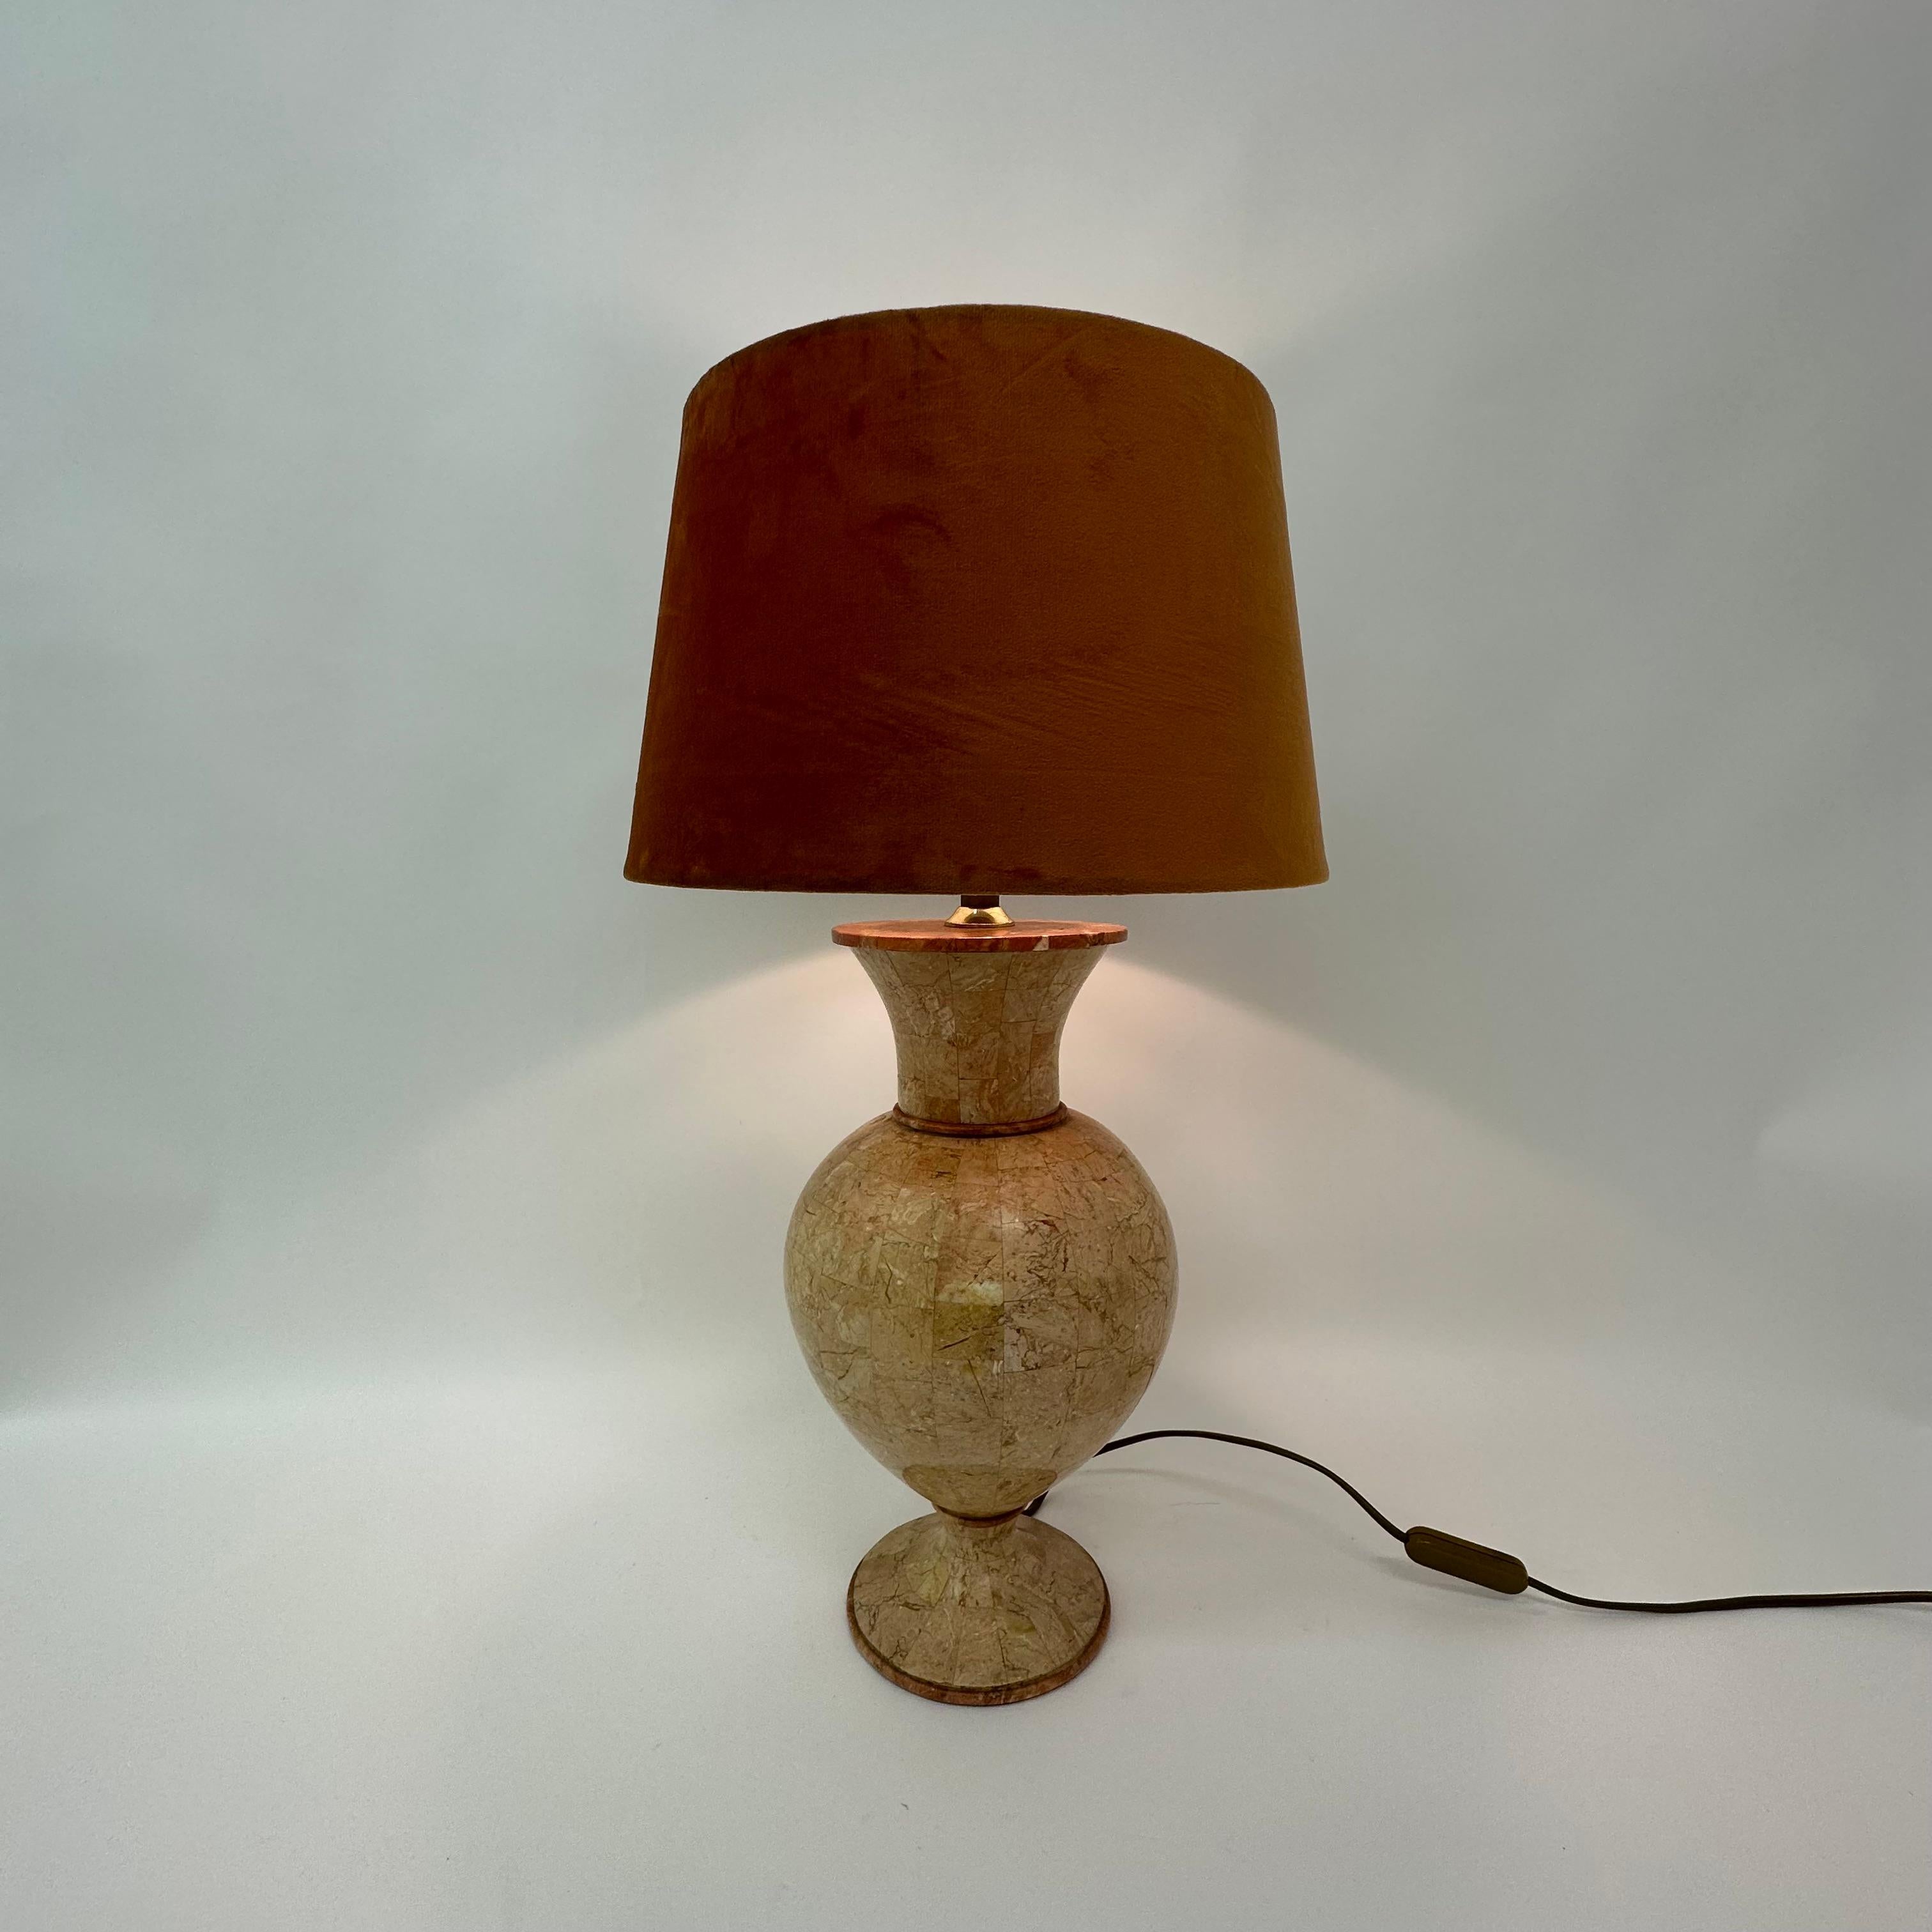 Vintage Tessellated Marble Table Lamp by Maitland Smith, circa 1970s For Sale 1